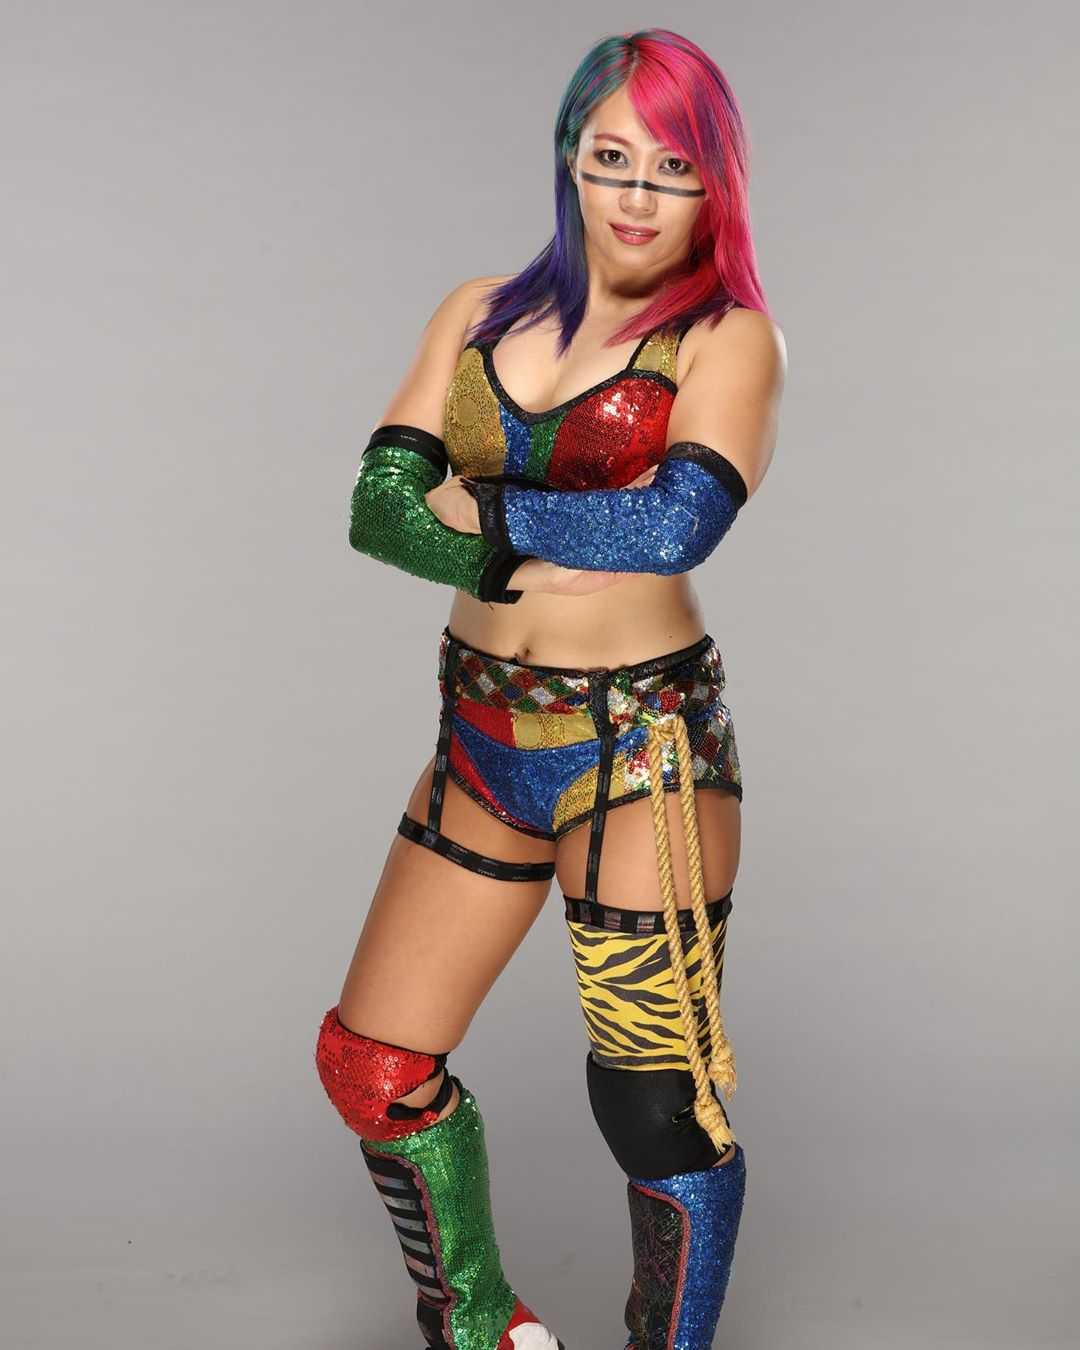 70+ Hot Pictures Of Asuka WWE Diva Unveil Her Fit Sexy Body 16